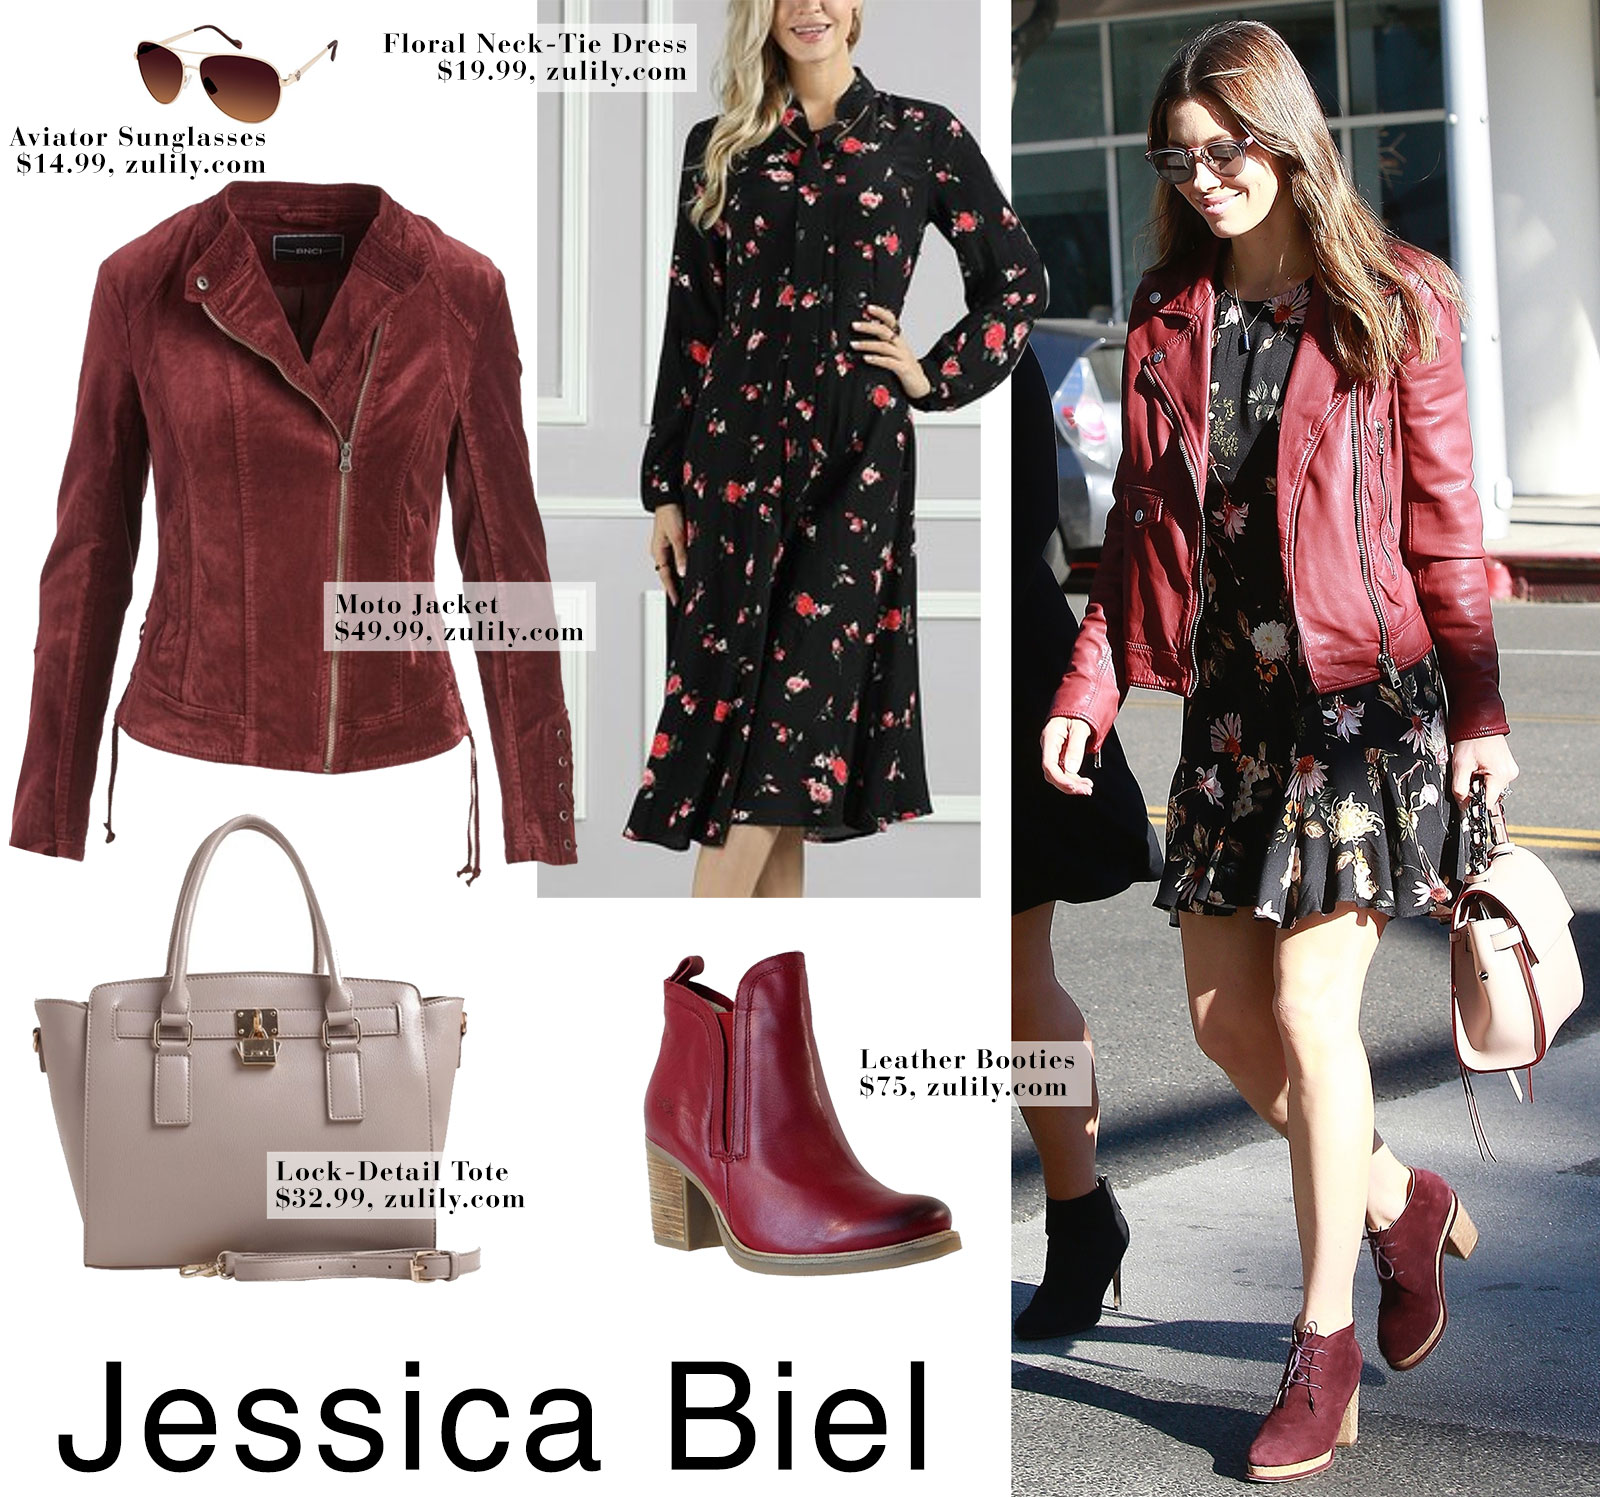 Jessica Biel wears a floral dress with a burgundy red moto jacket and Chanel lace up booties.